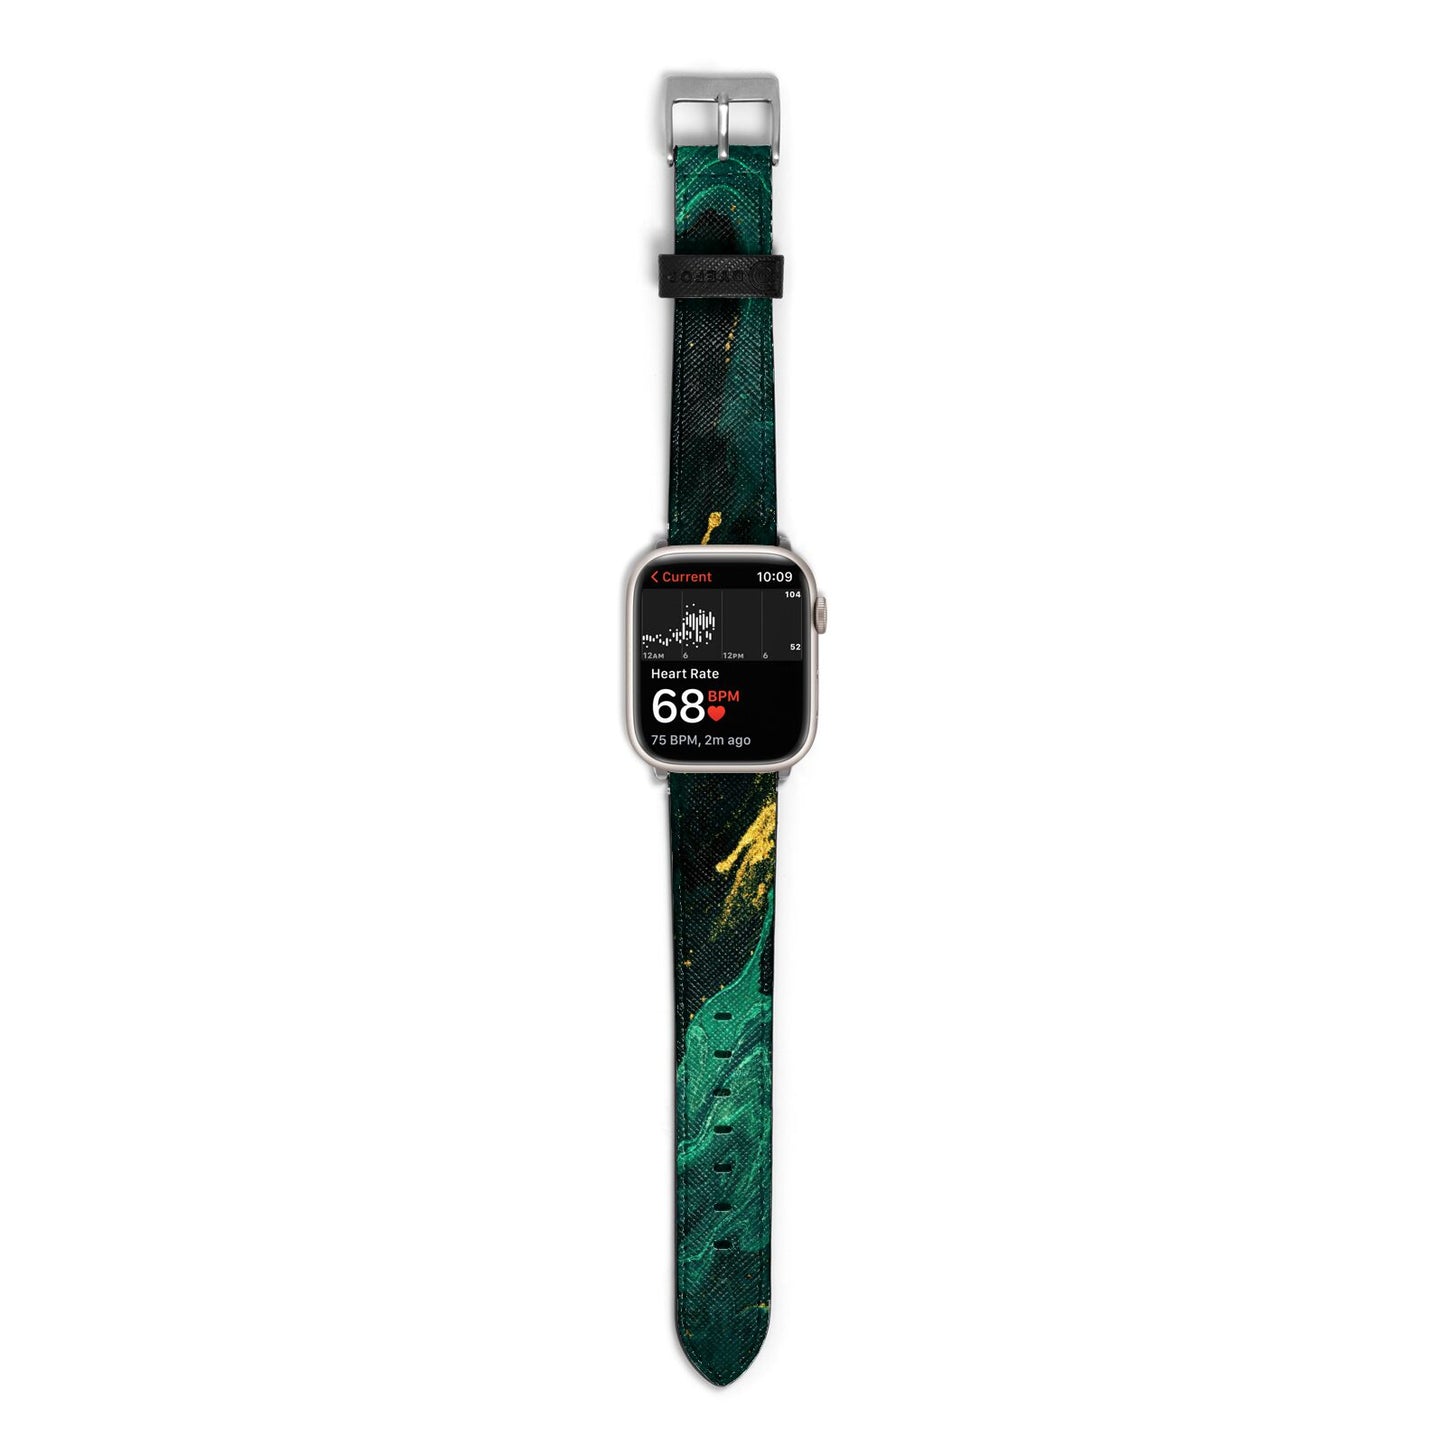 Emerald Green Apple Watch Strap Size 38mm with Silver Hardware